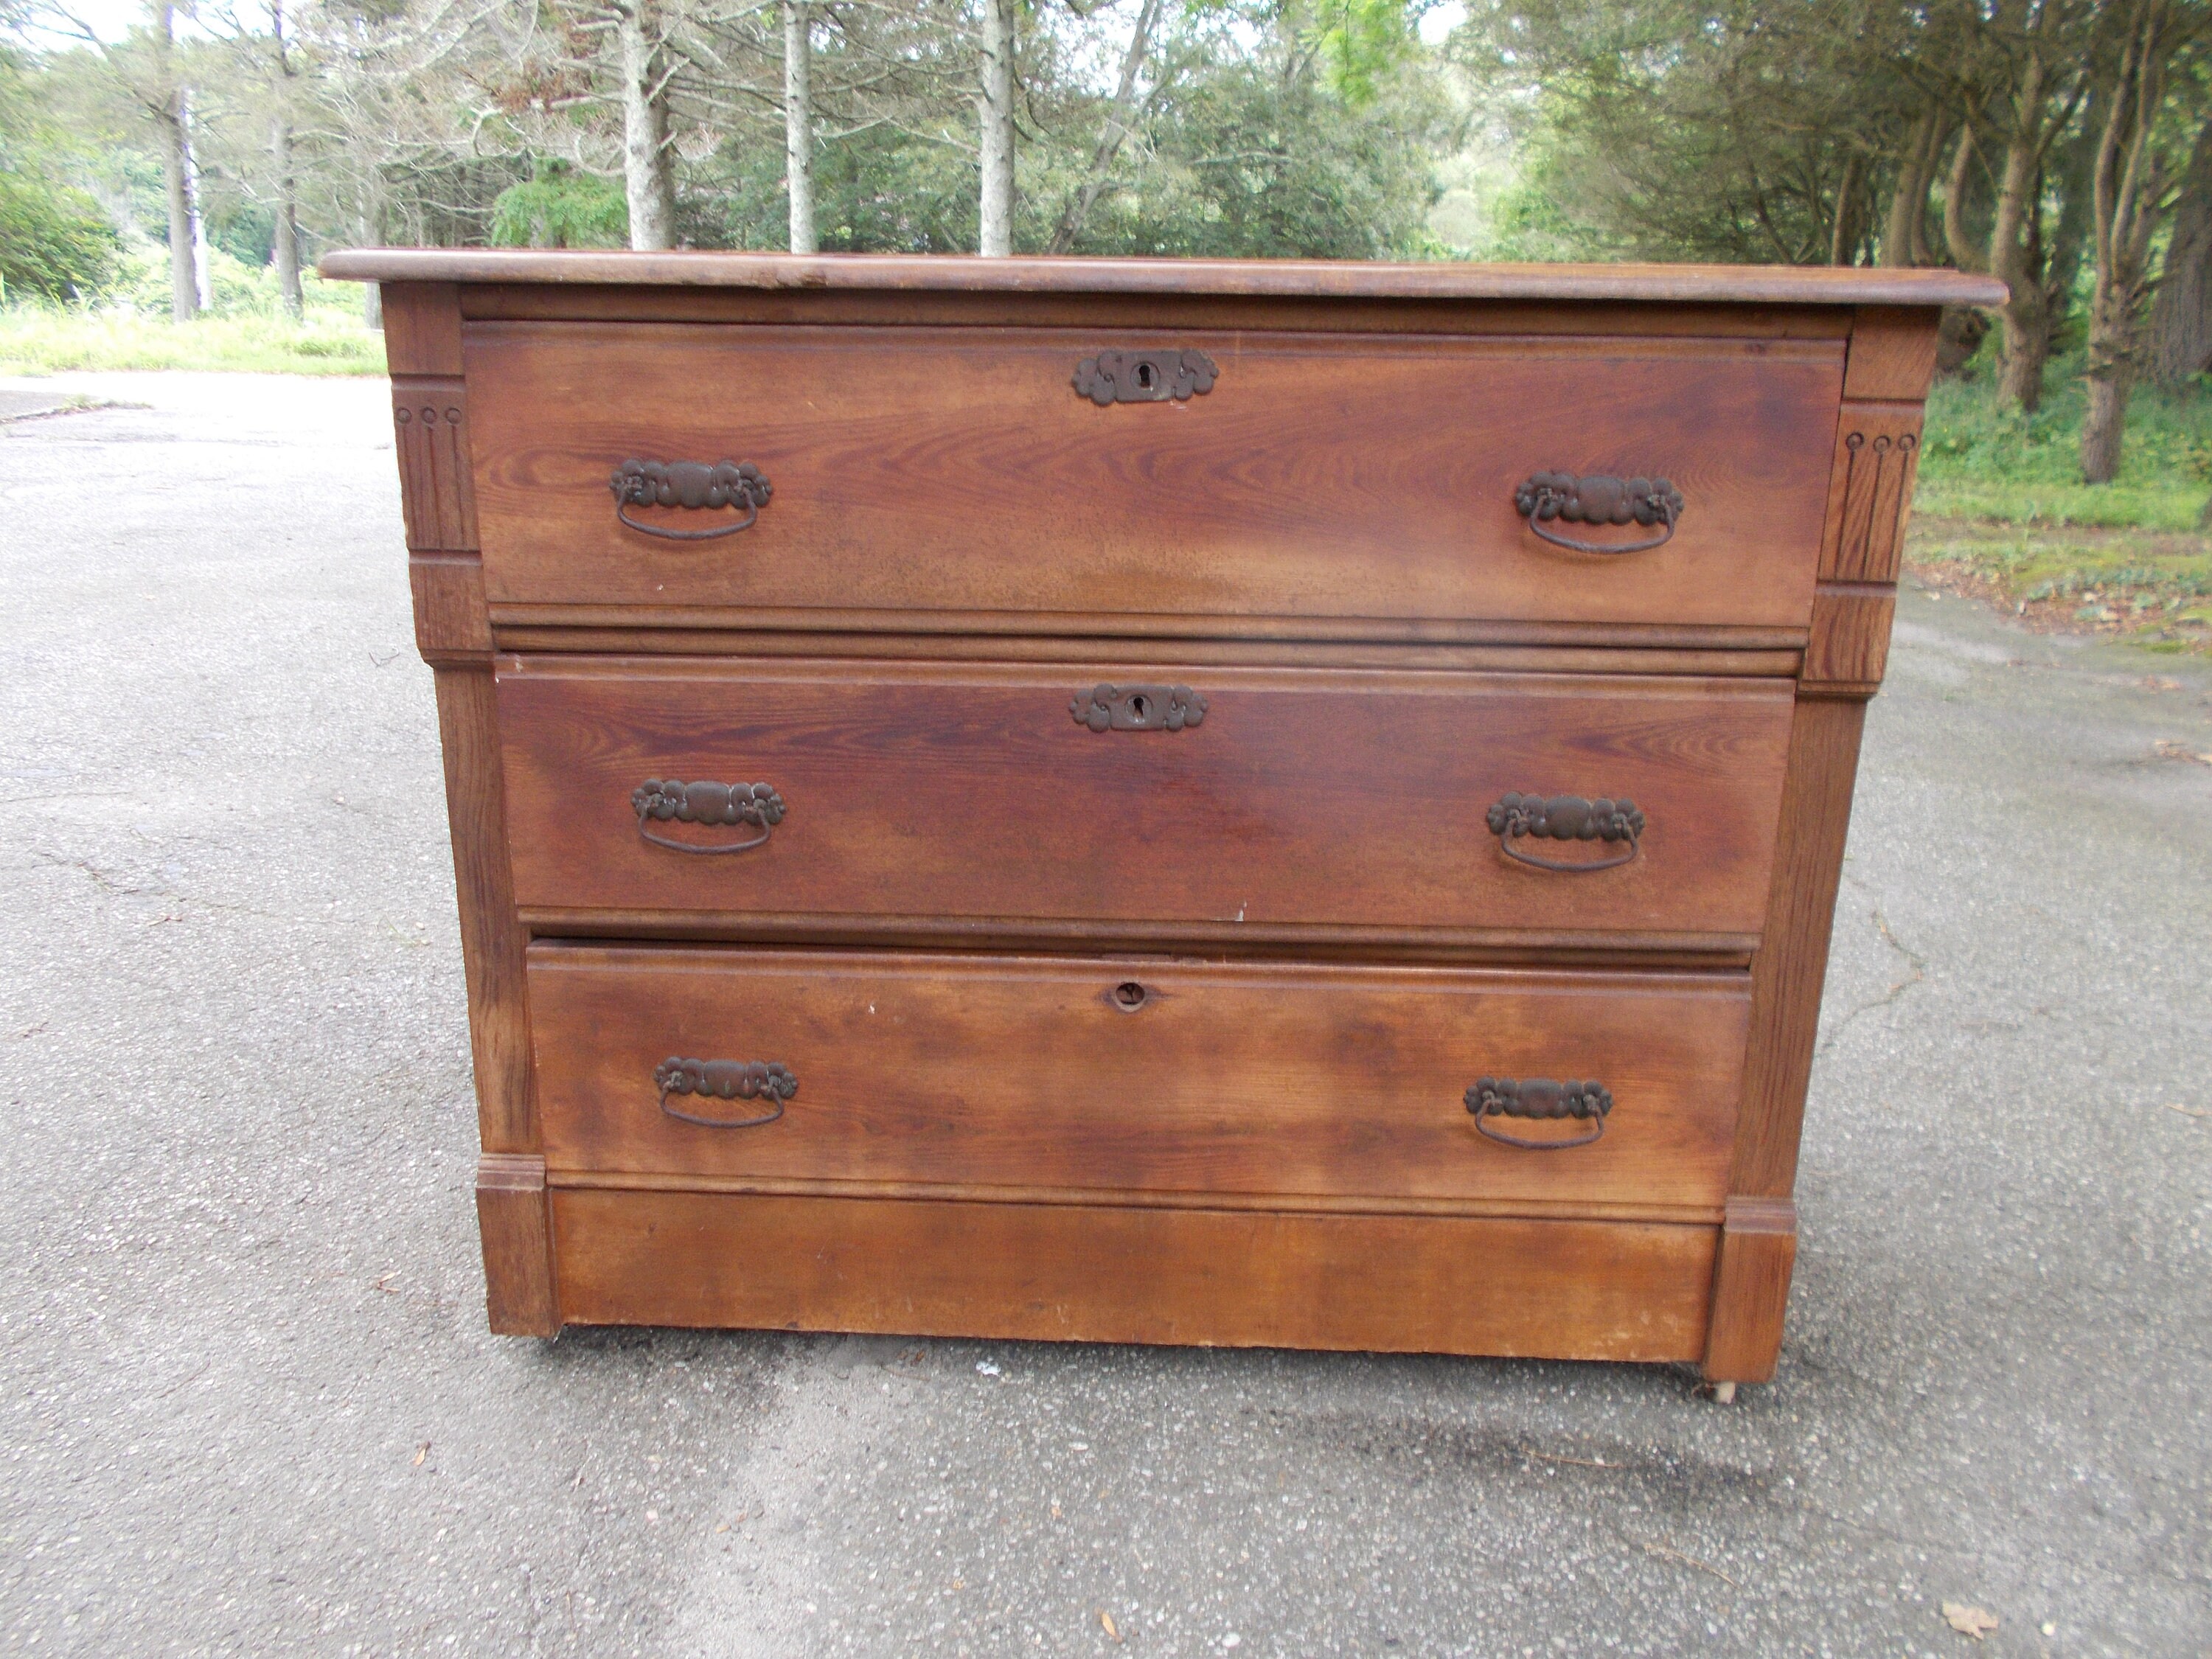 Early 1900s Wood Chest Of Drawers Bureau Dresser From An Old Etsy